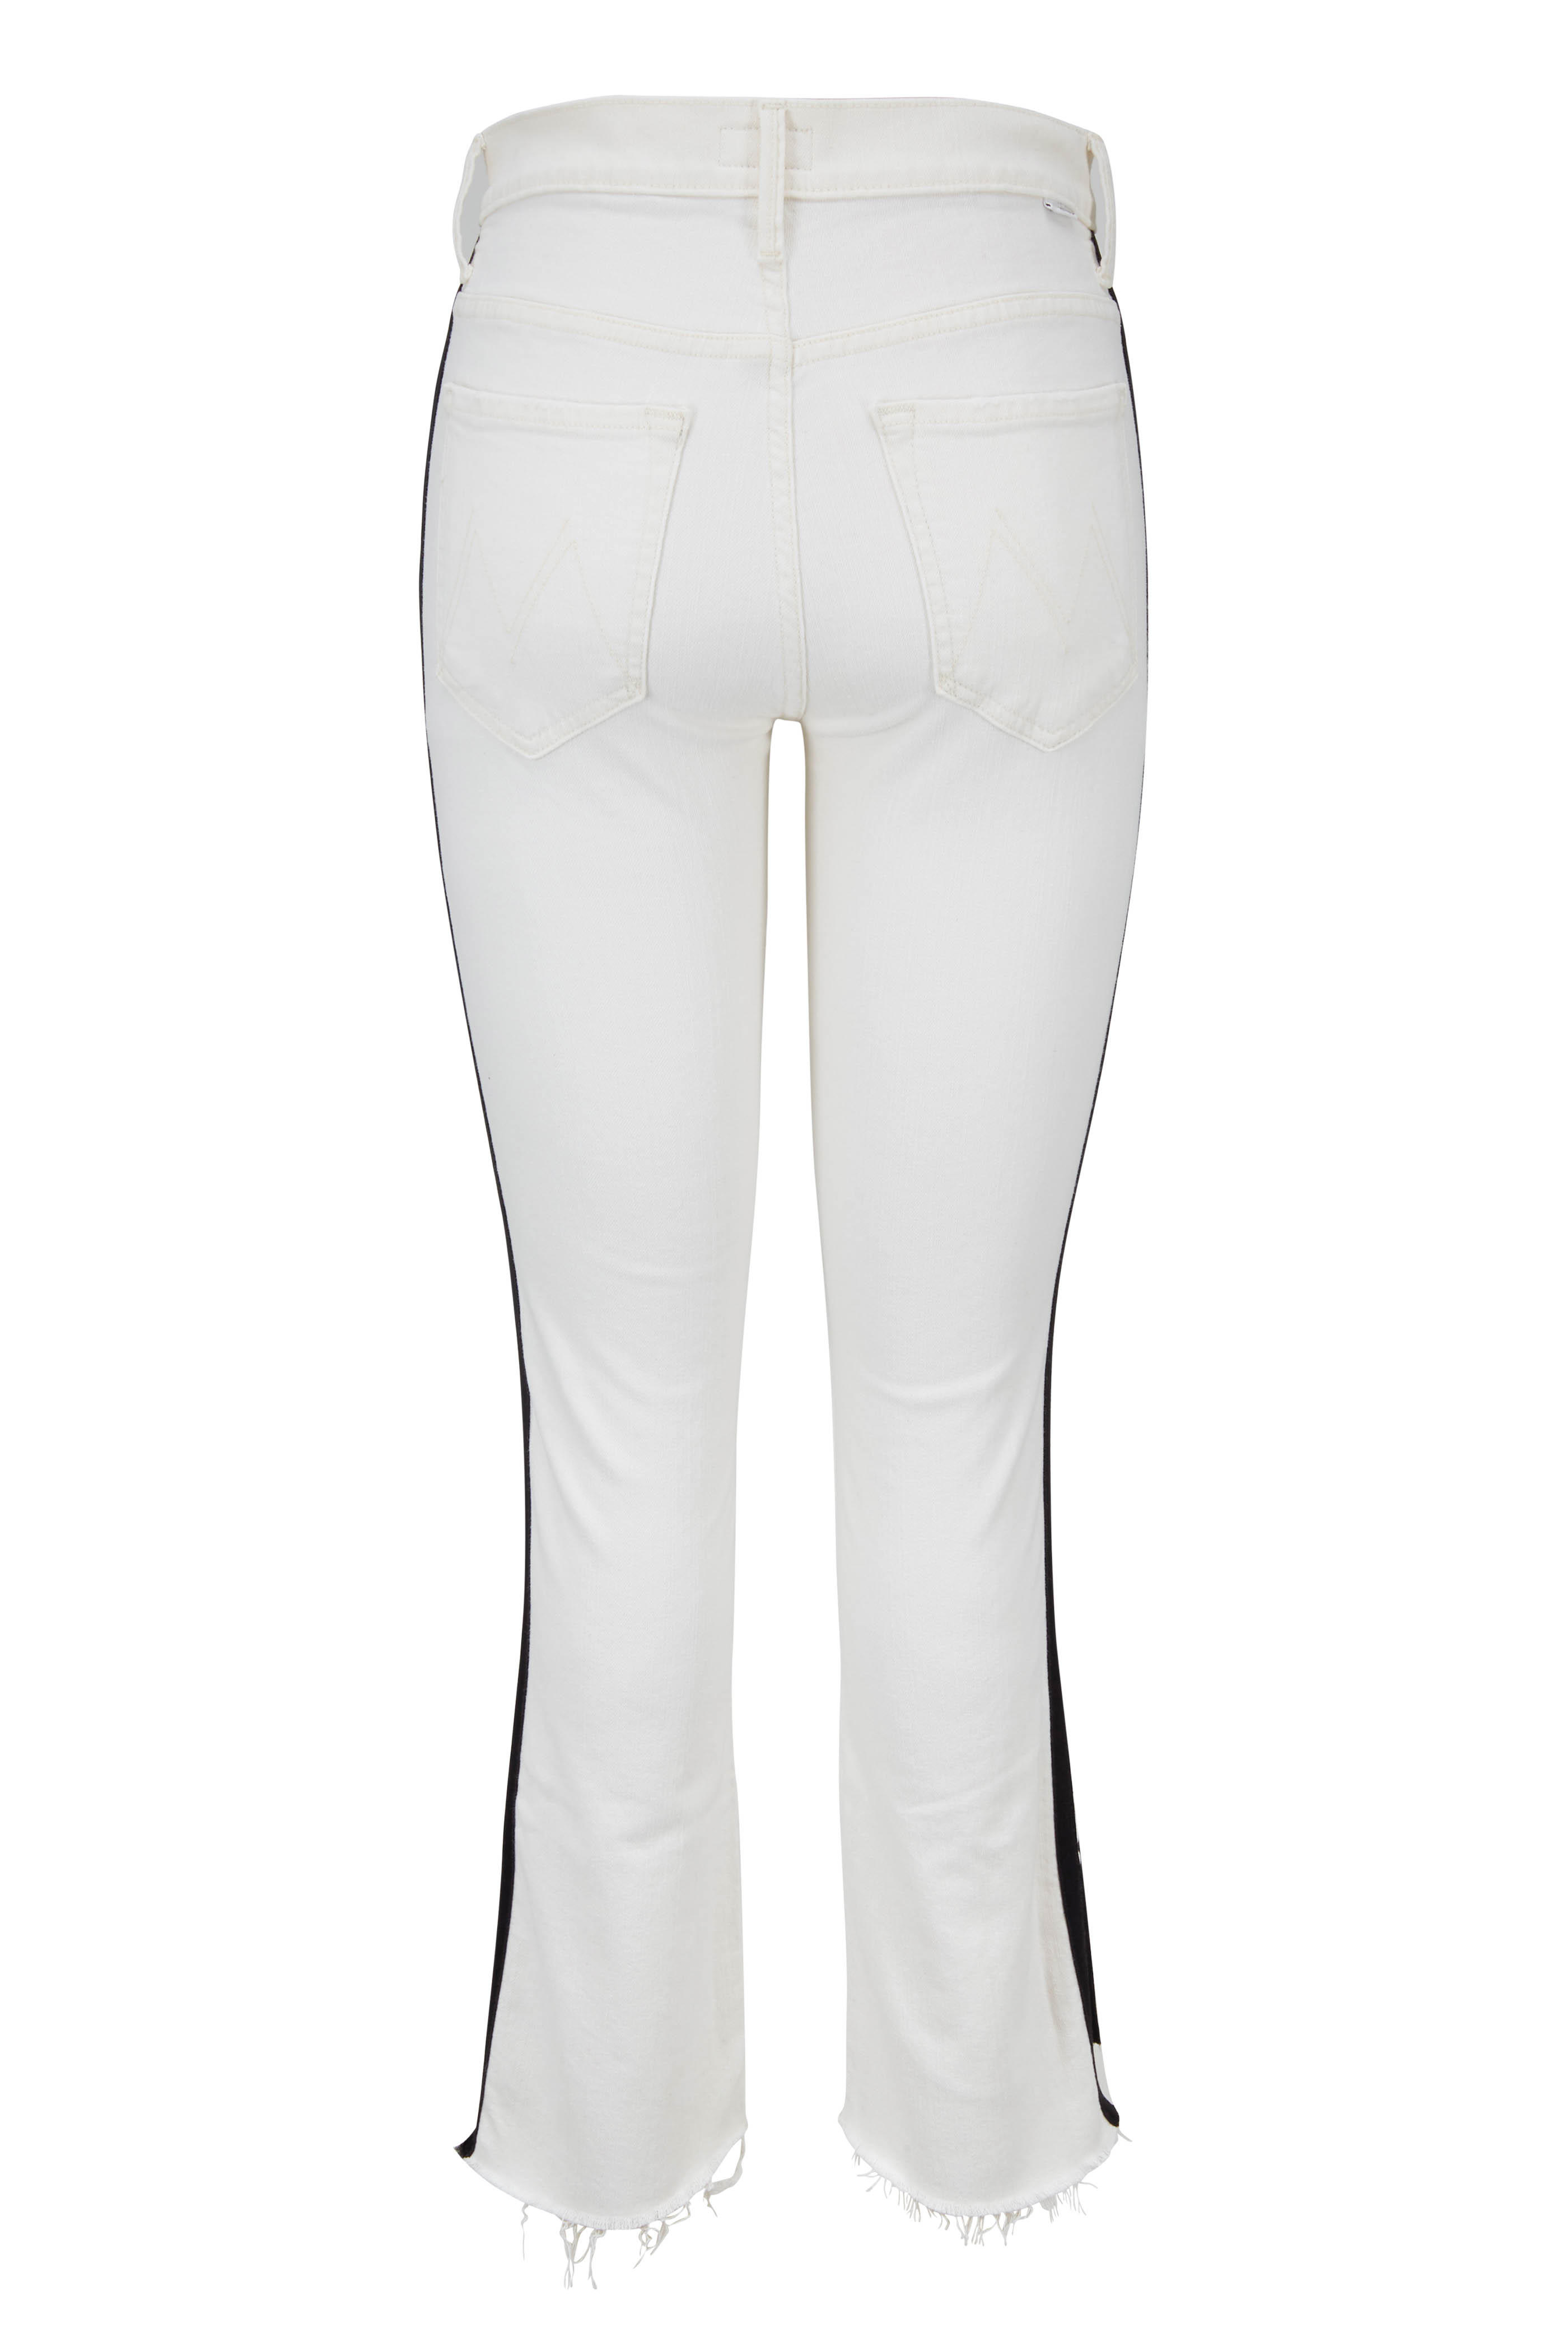 Mother Denim - The Insider White Step Fray Cropped Jean